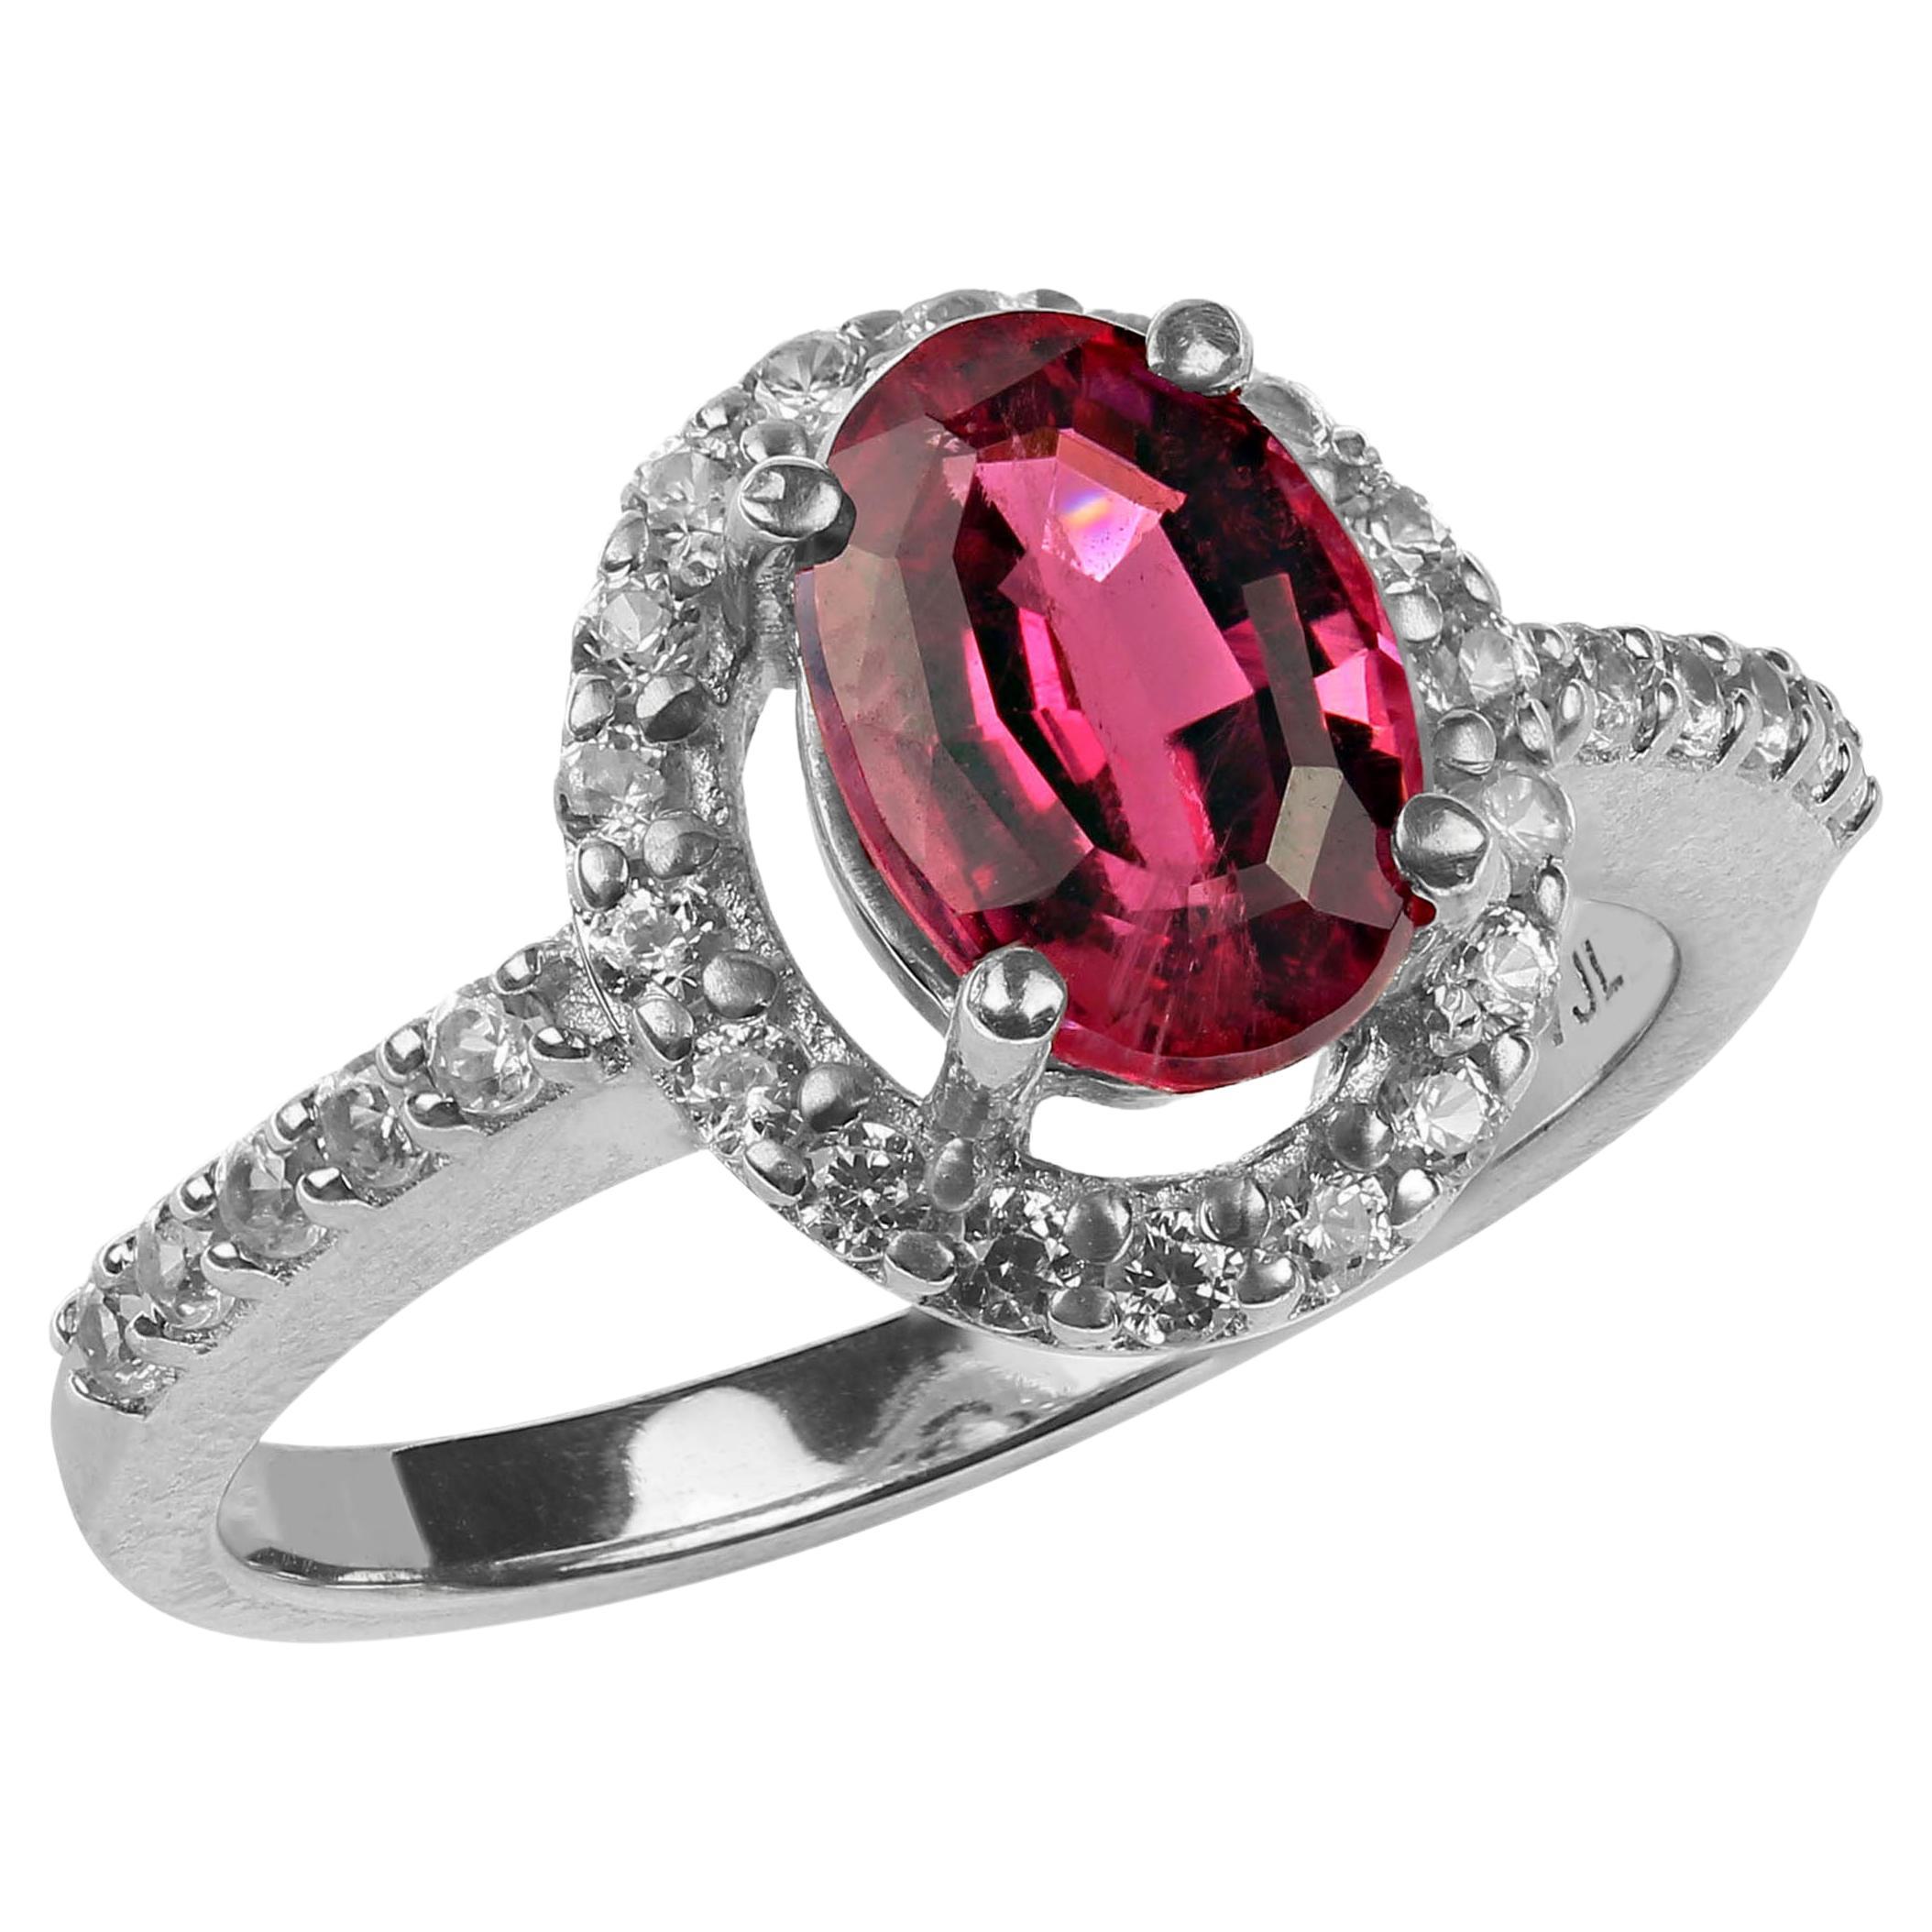 Happy Valentine's Day!
Glittering 1.6ct oval rubelite accented with 0.57ct of genuine white zircons all set in glowing sterling silver ring. This unique ring is a 'must have.'  The gorgeous step cut oval rubelite comes straight from one of our